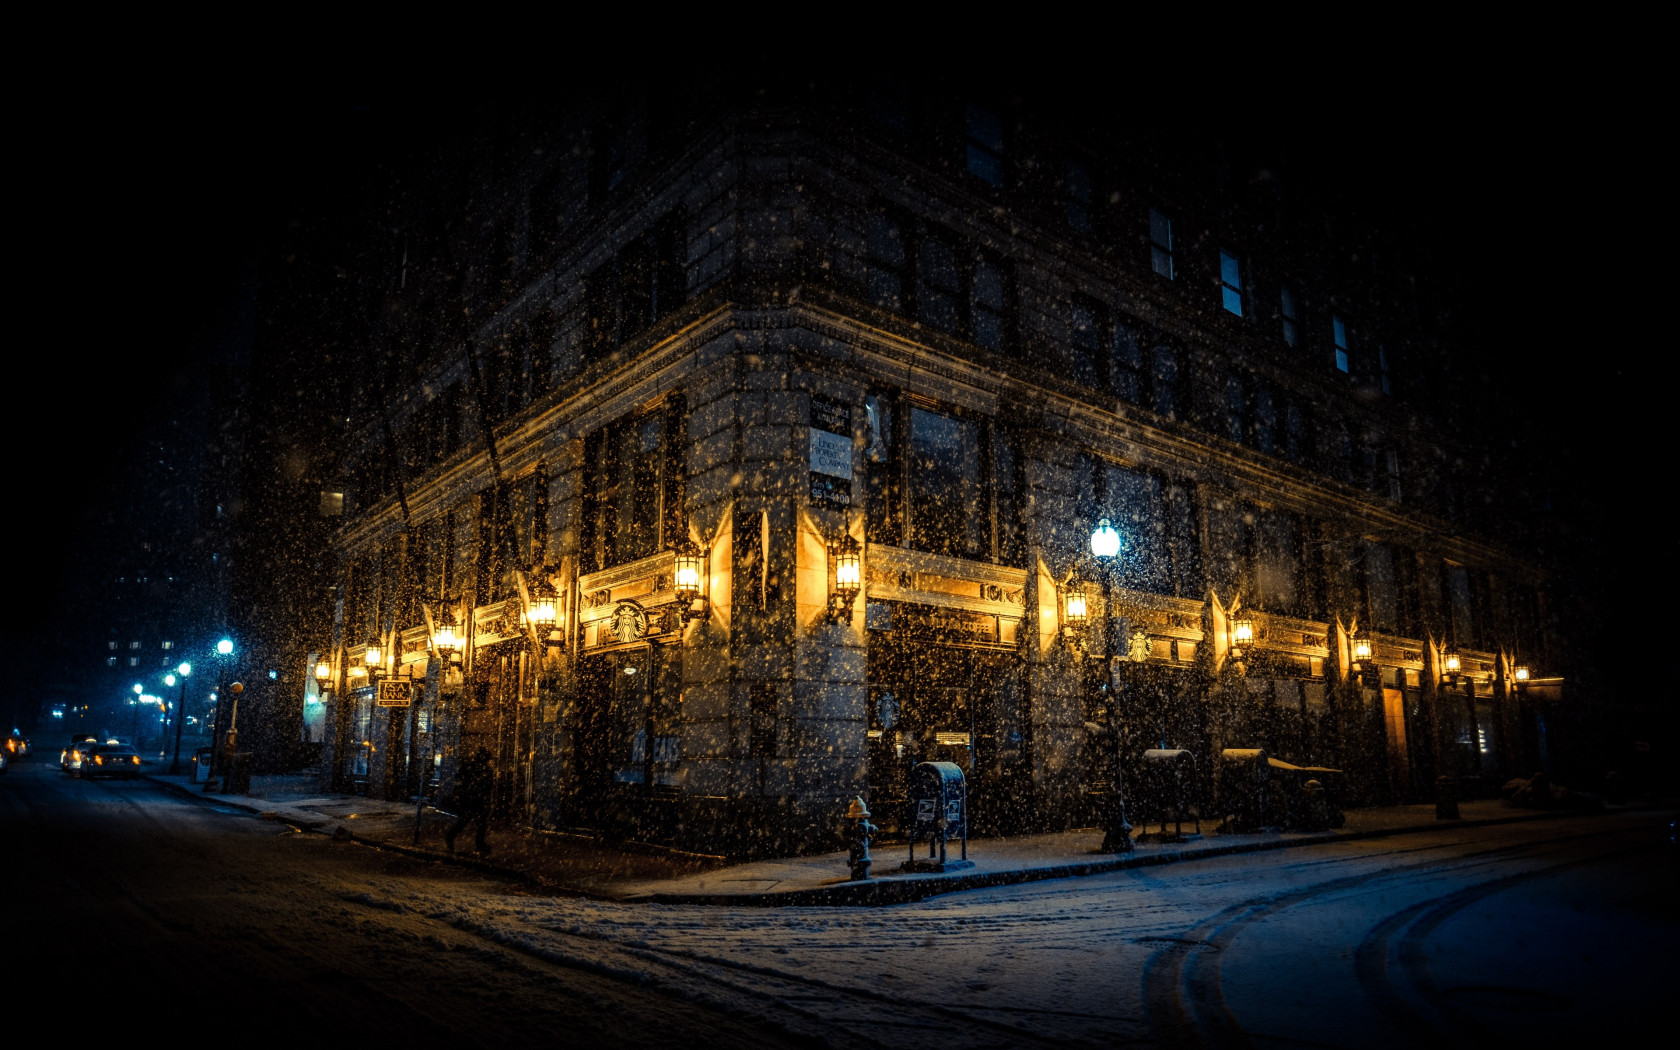 Snowing on the city streets wallpaper 1680x1050